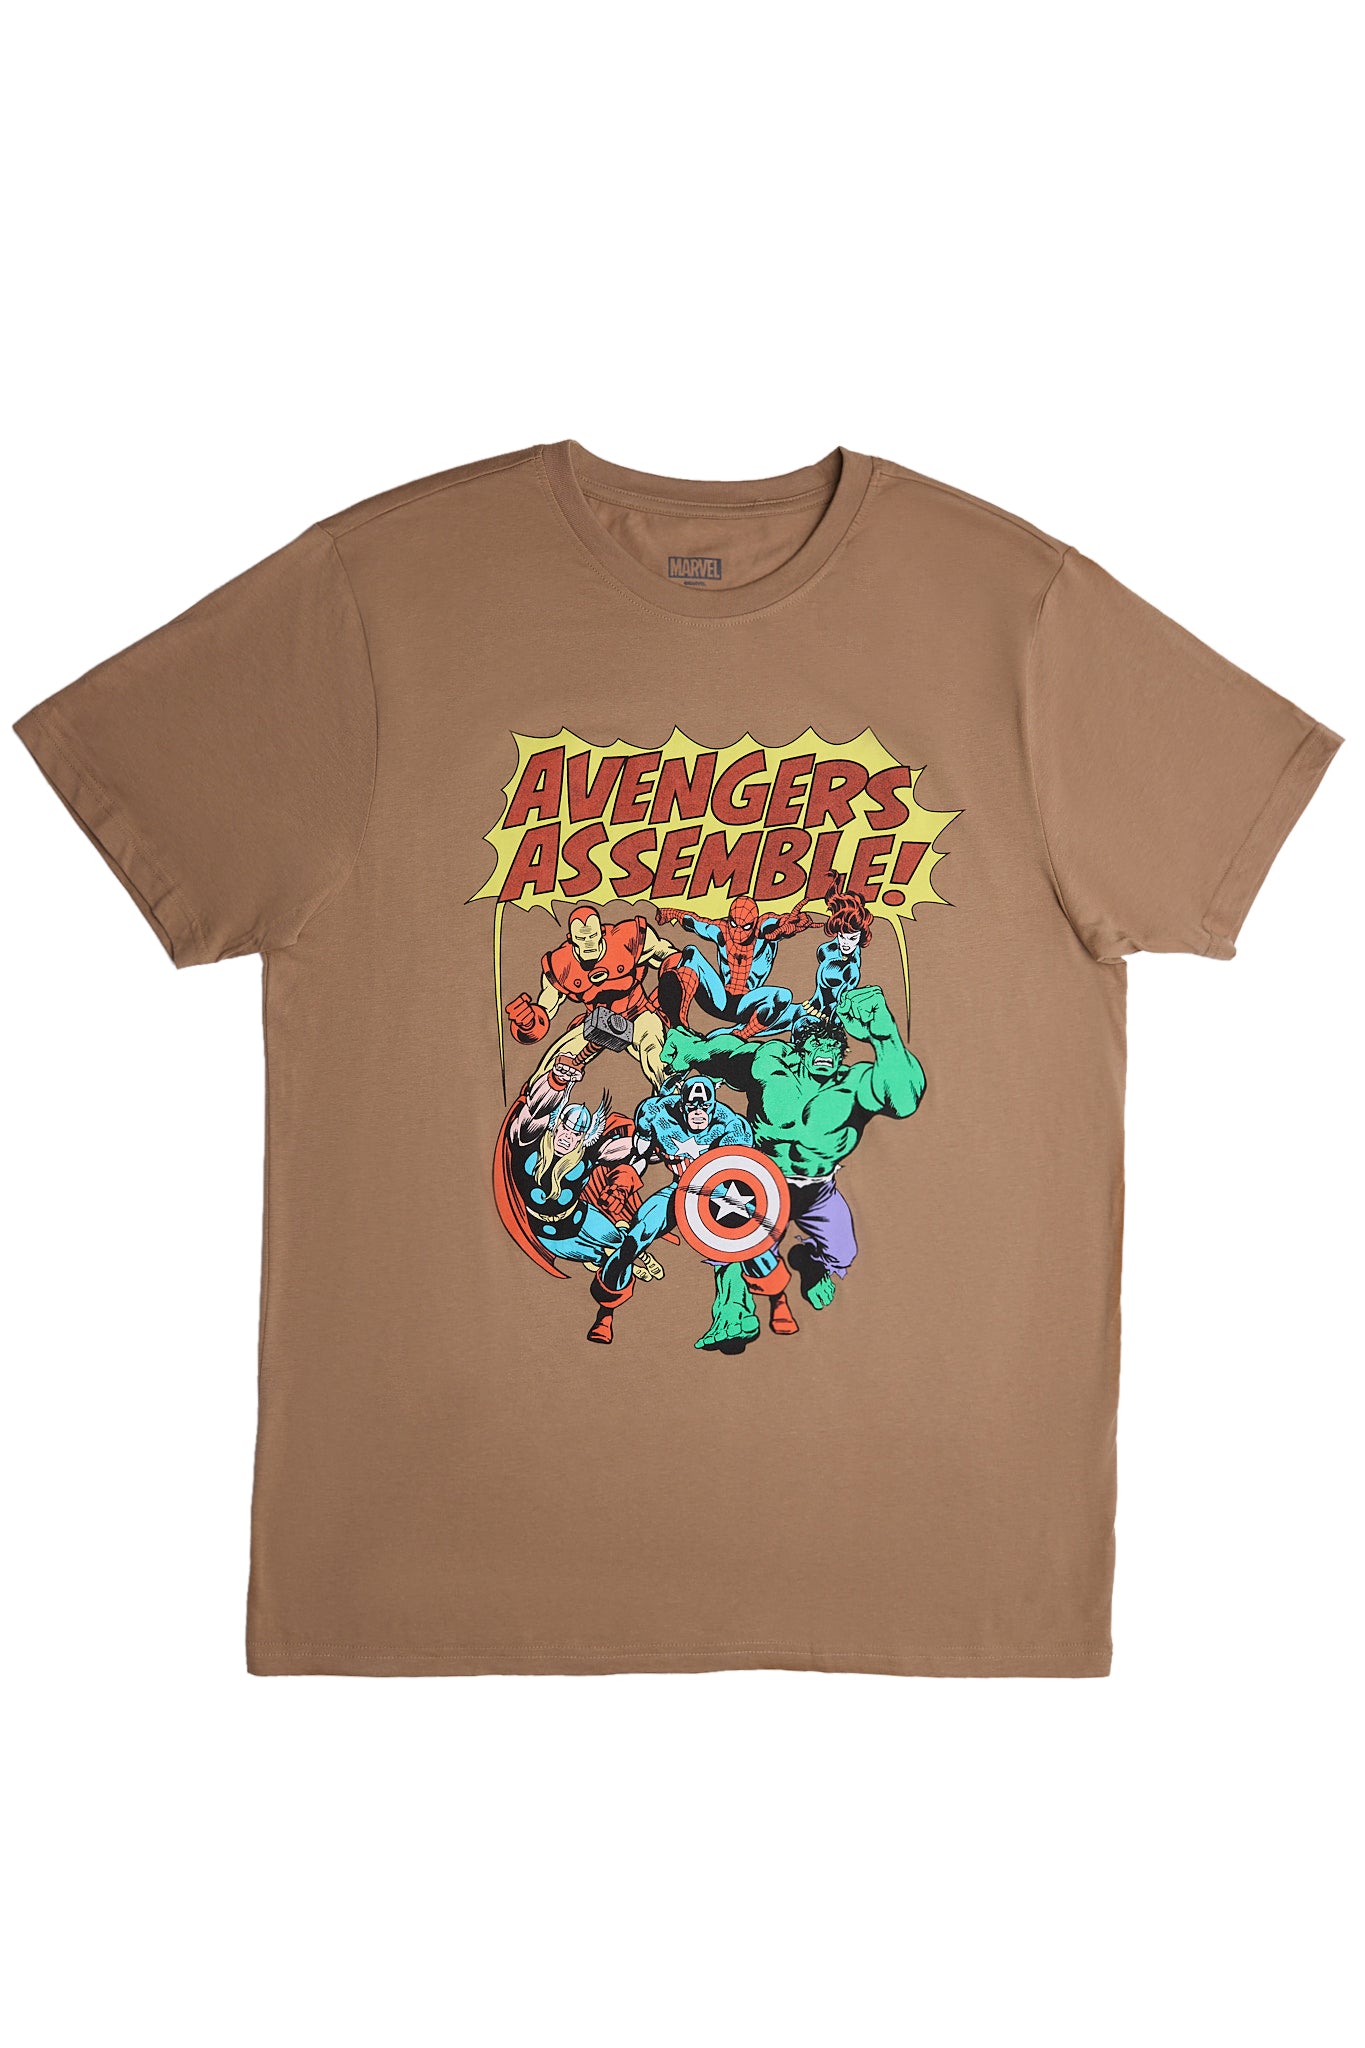 Avengers Assemble! Graphic Tee